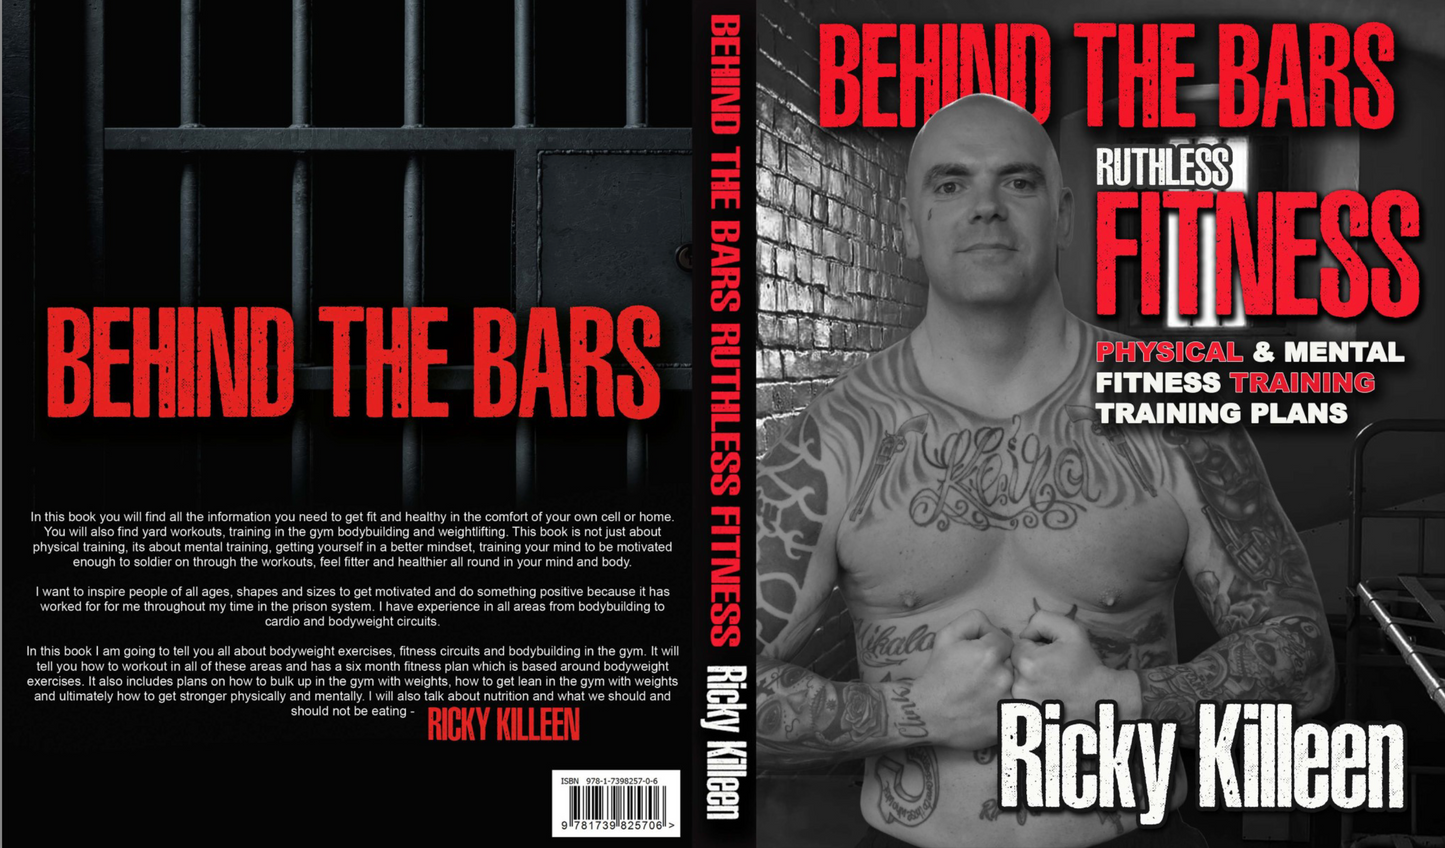 Behind The Bars Ruthless Fitness. Fitness Book